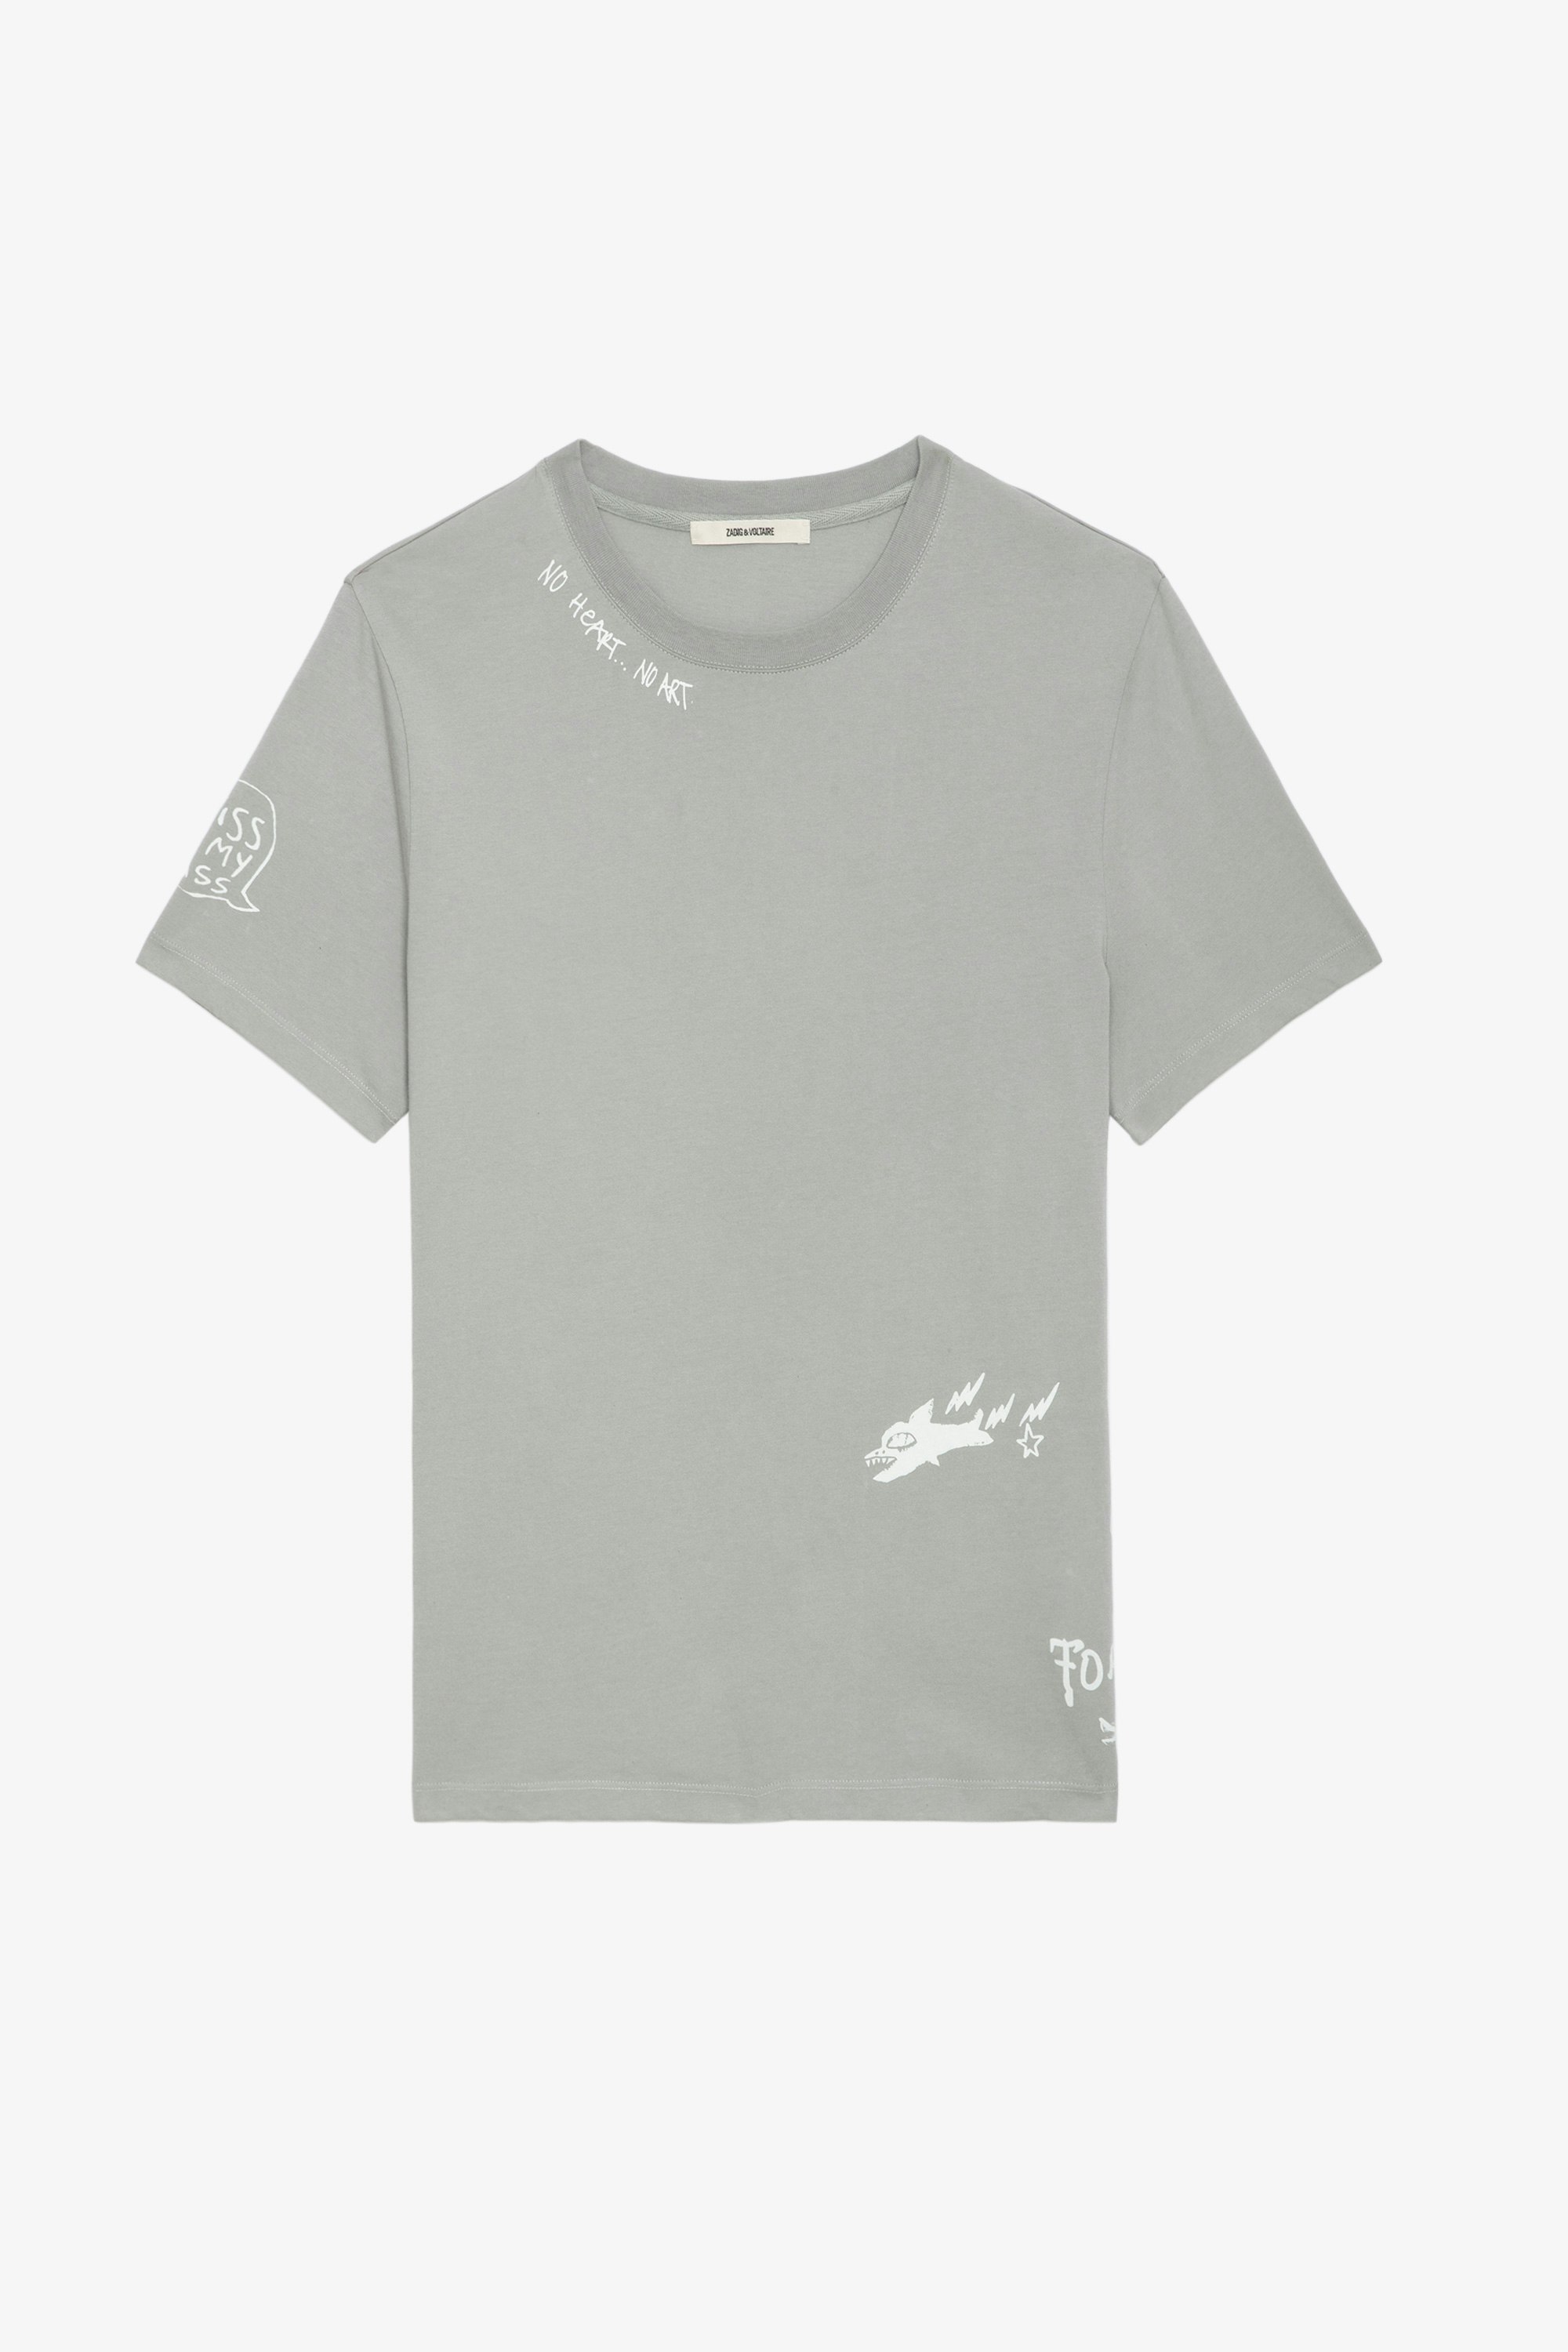 Ted Tag T-shirt - Grey organic cotton T-shirt with customised details designed by Humberto Cruz.